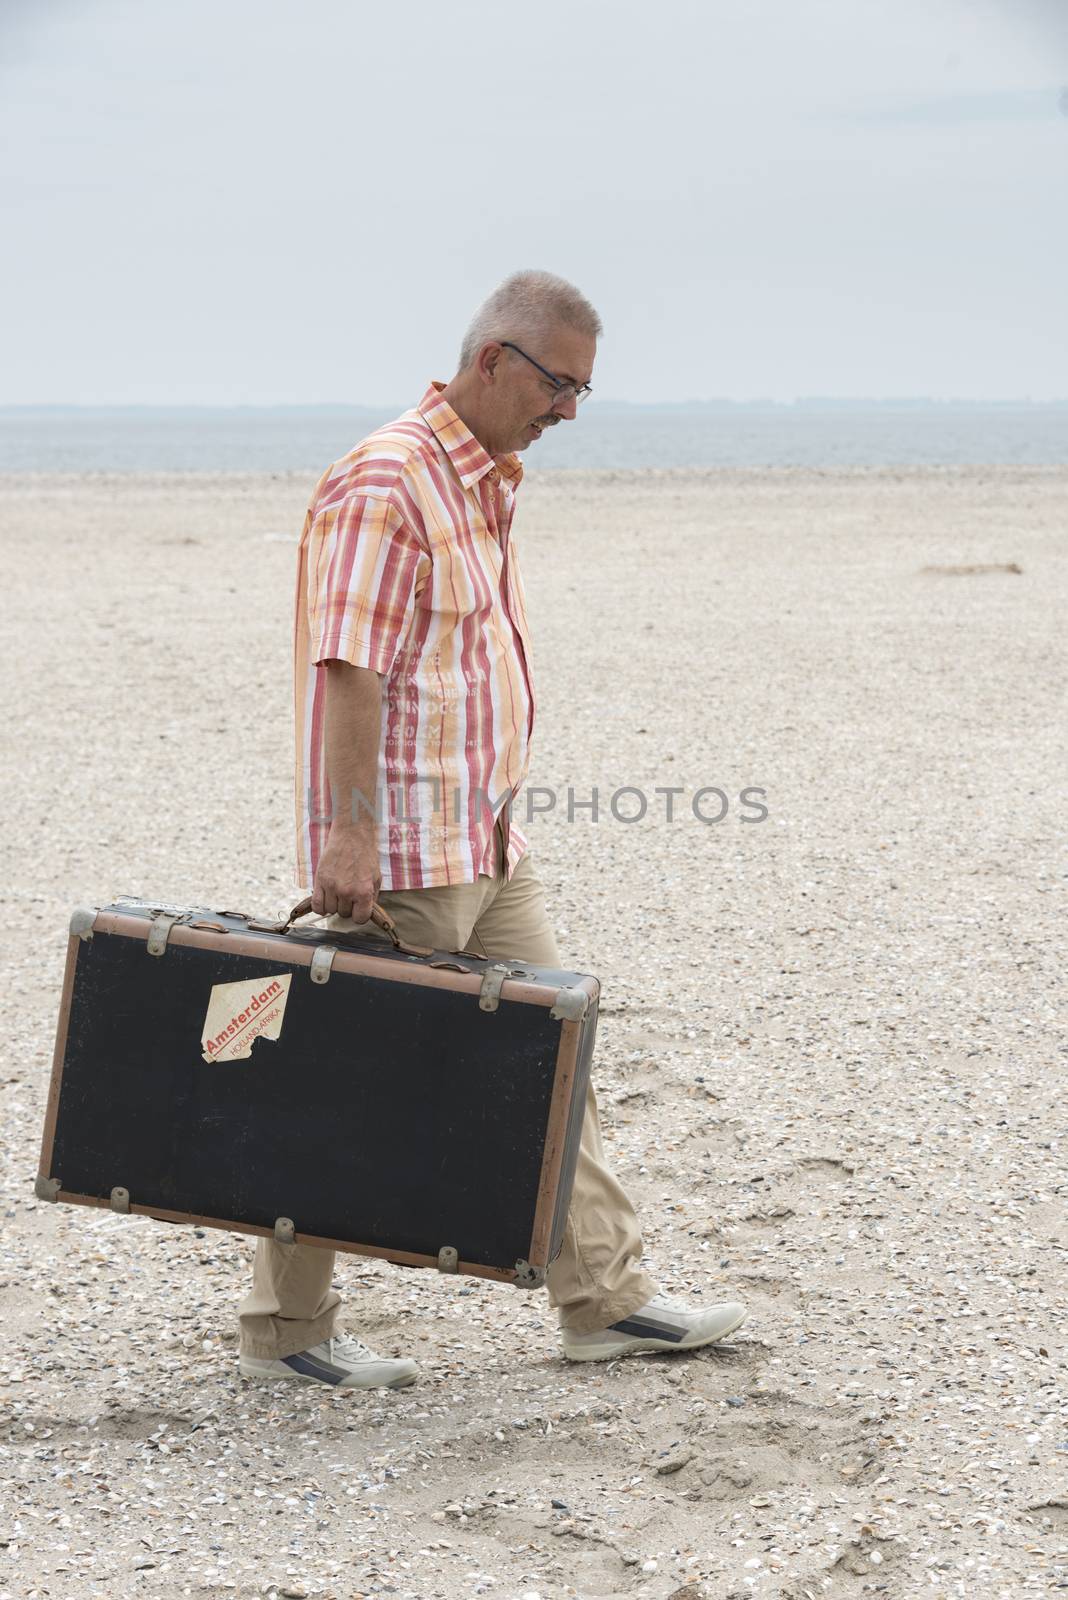  man with old suitcase   by compuinfoto